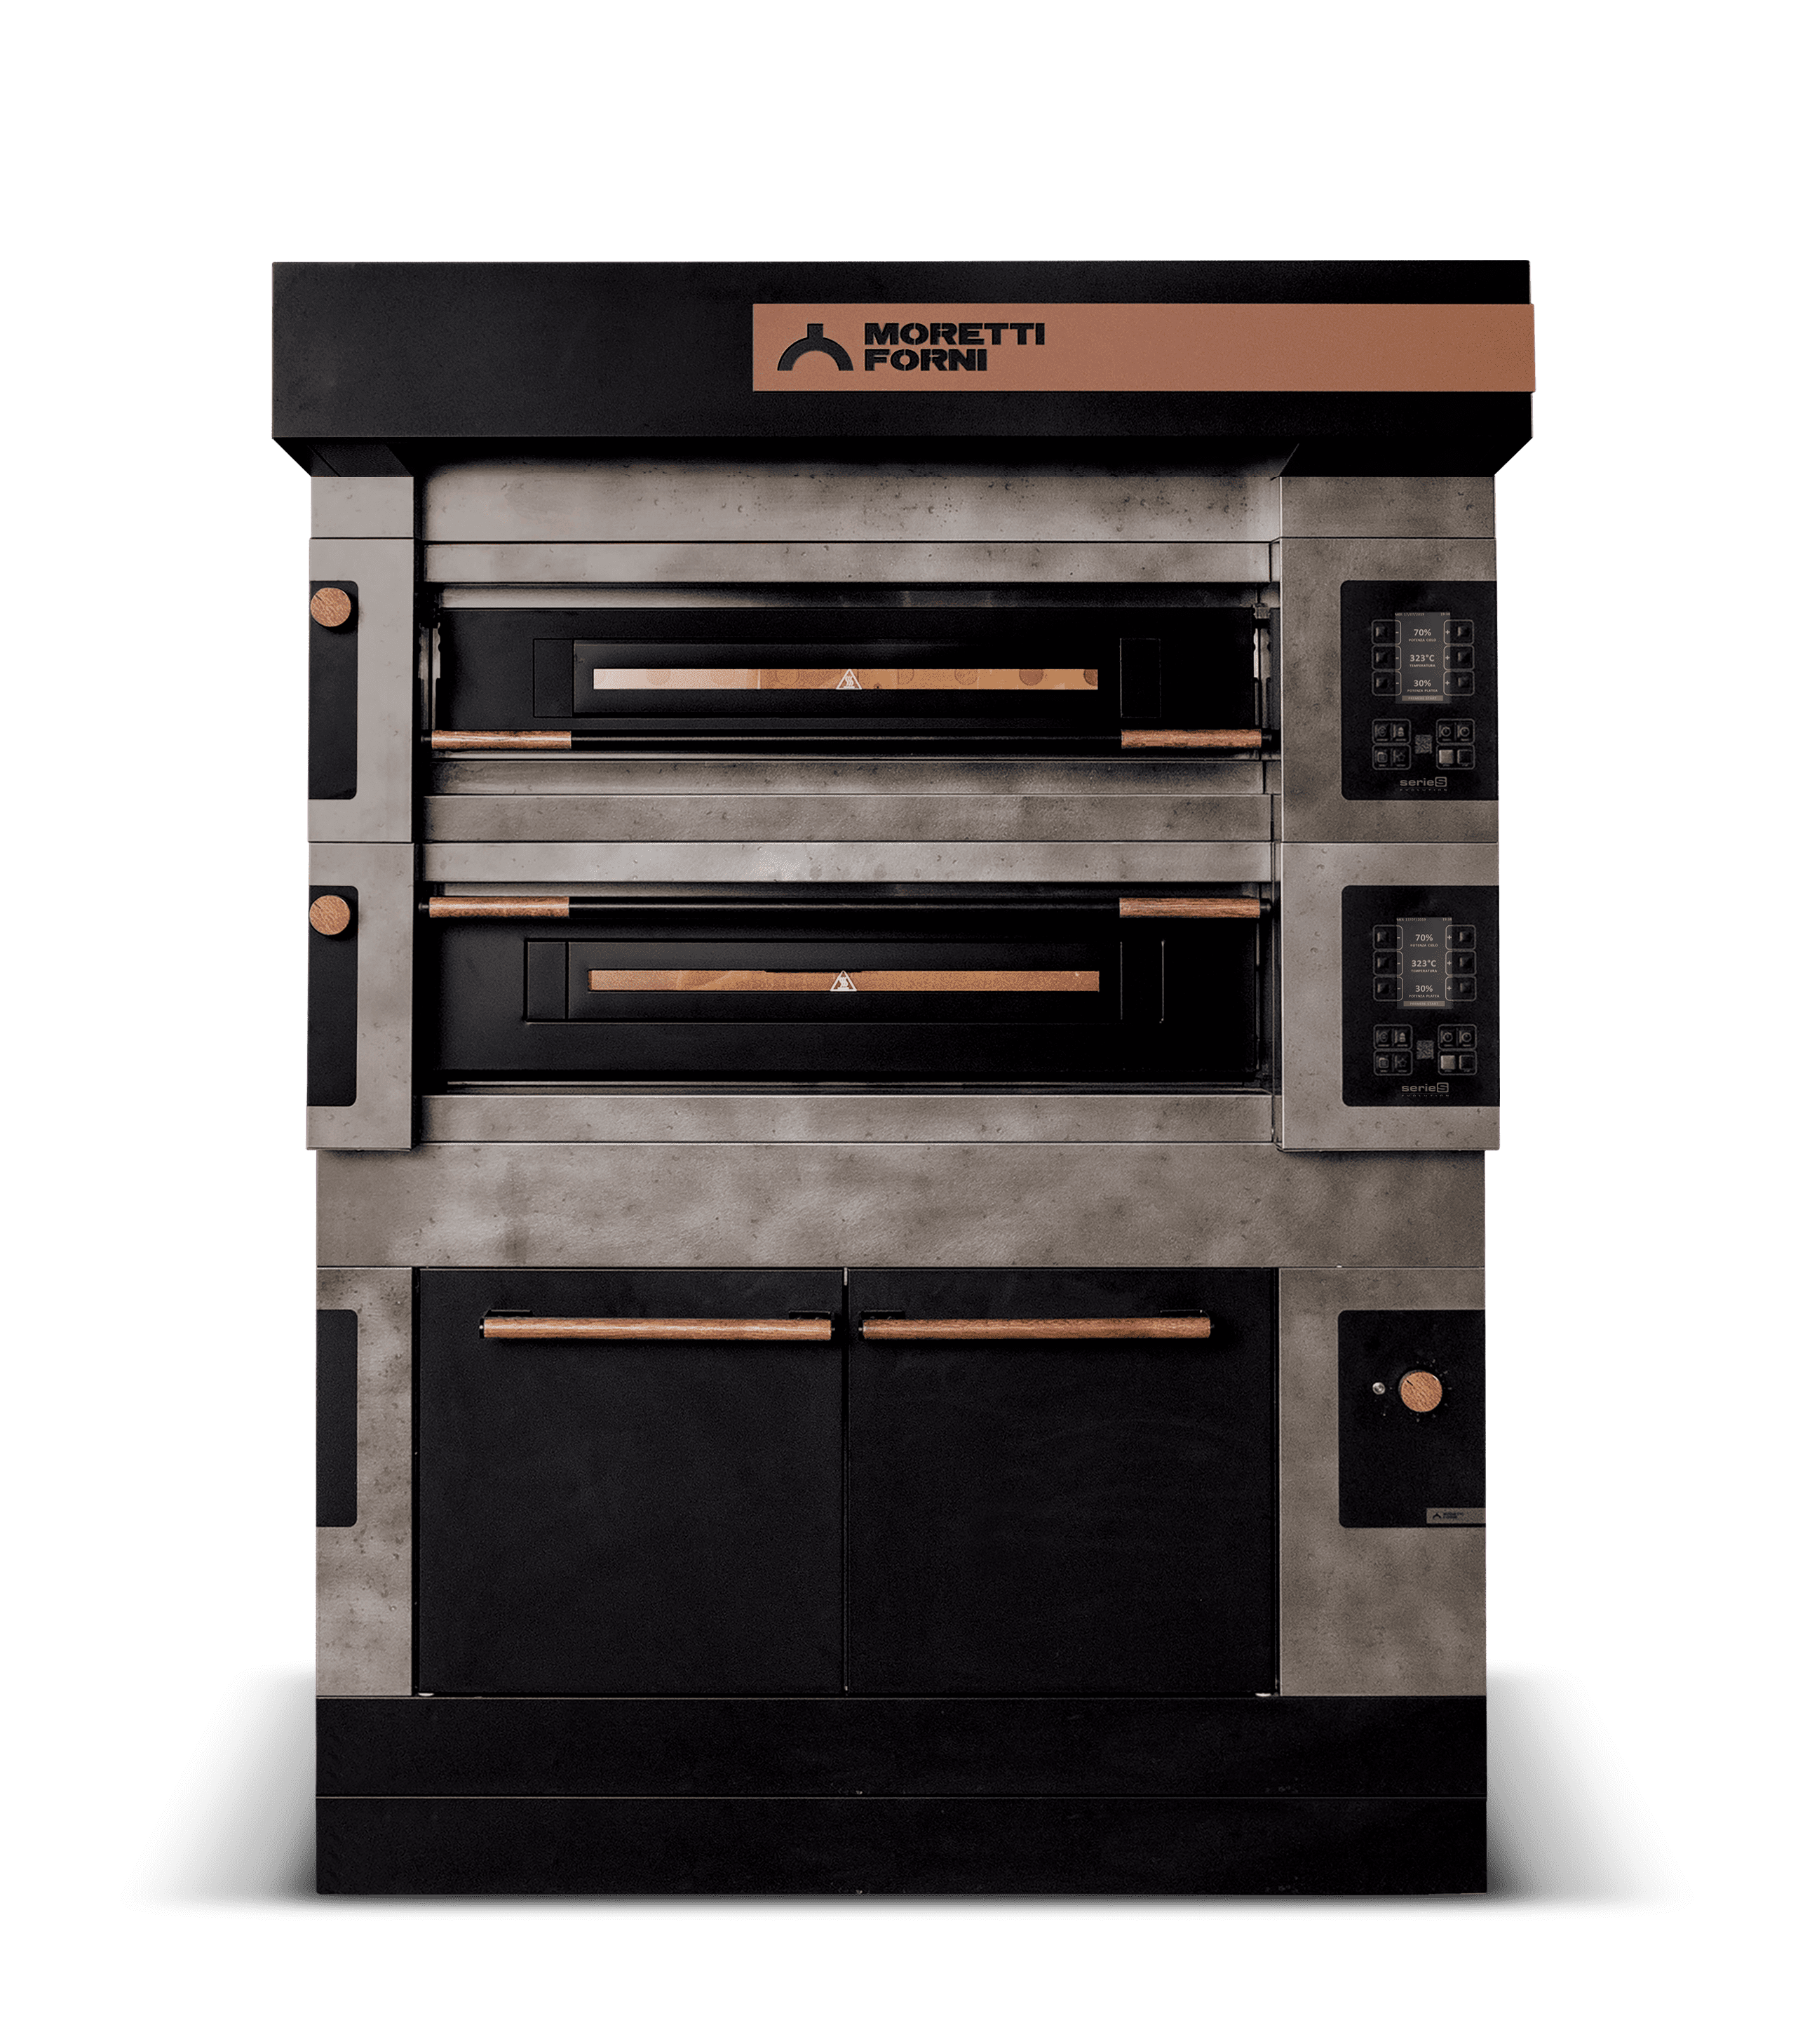 S100E ICON - serie S modular Electric Pizza oven 37-1/2"x29x6-1/4 (Chamber)